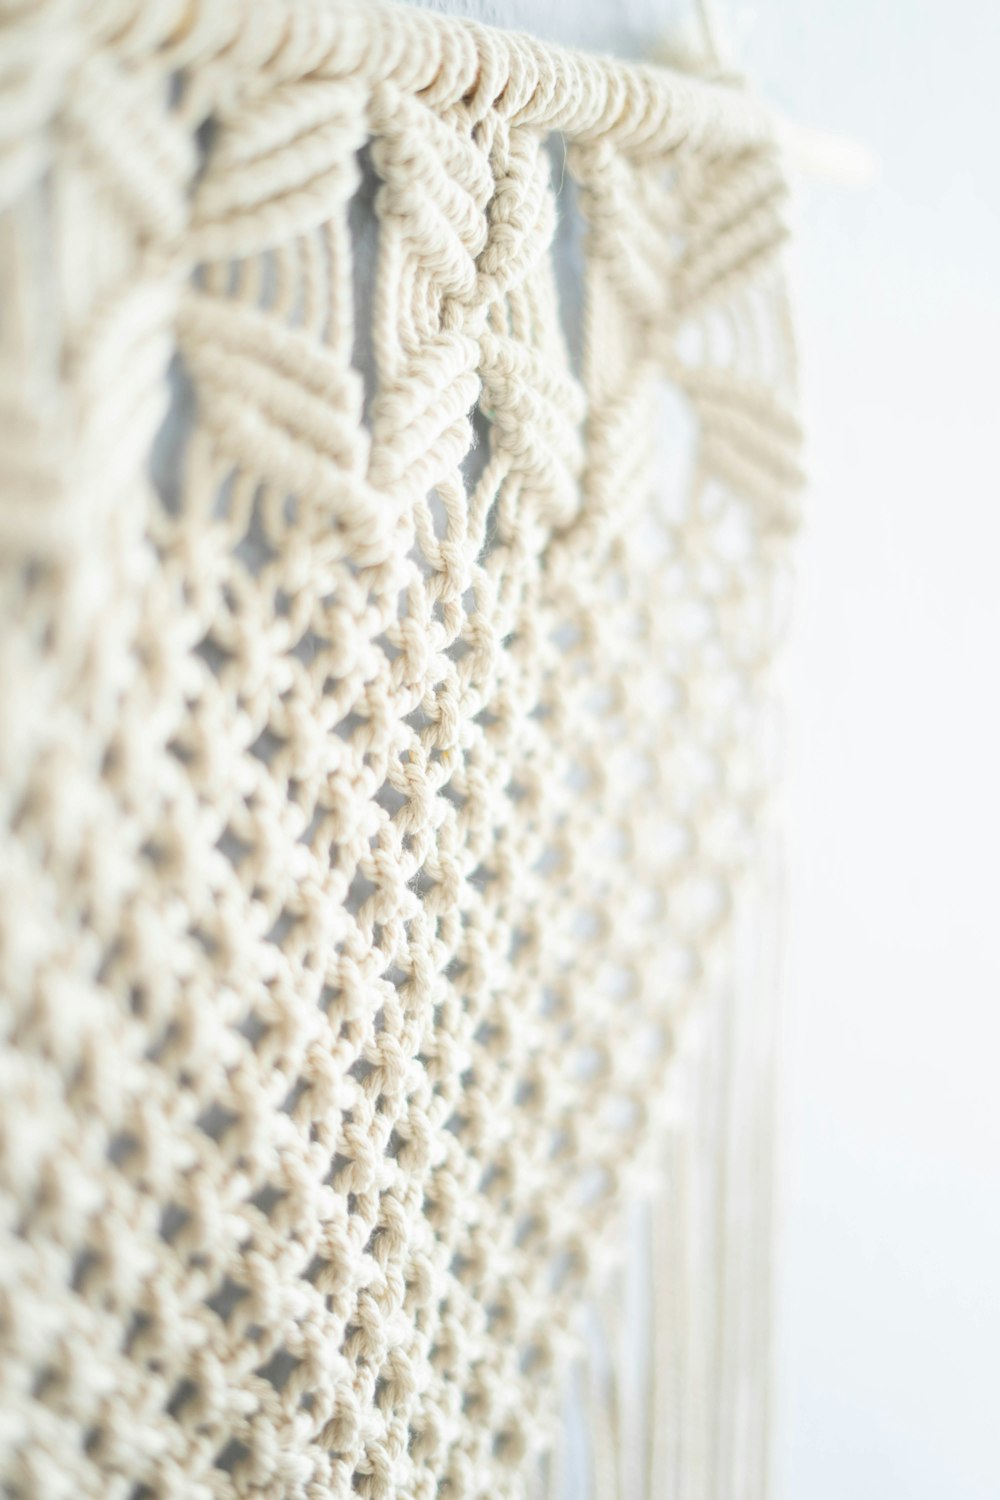 white knit textile in close up photography